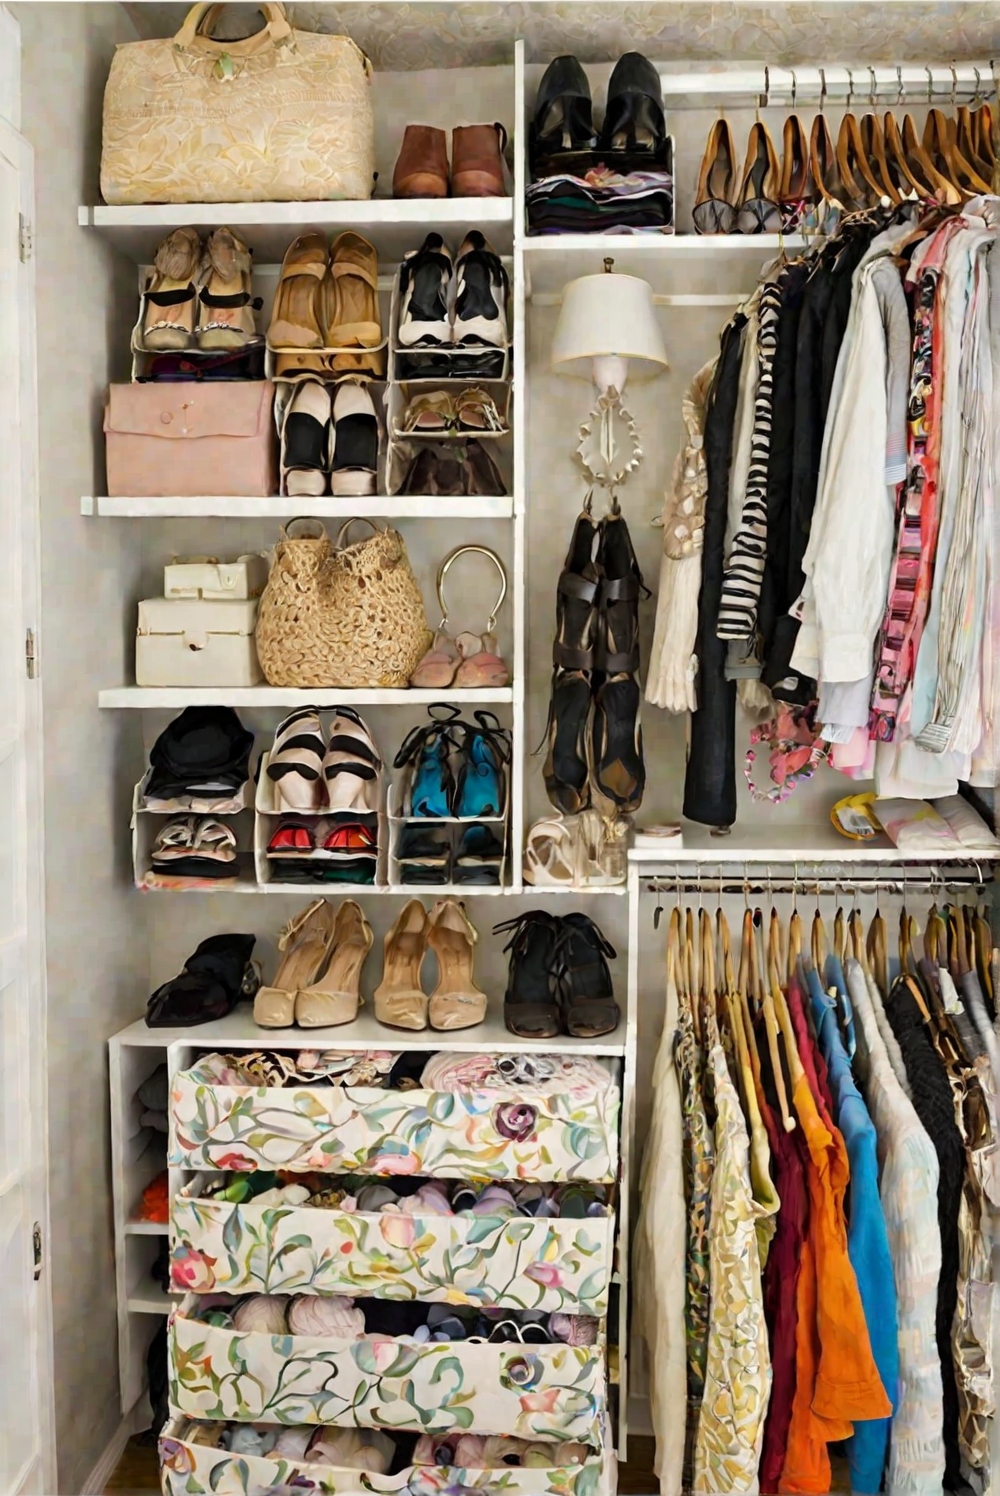 5 Ideas for Organizing Your Bedroom Closet No need to Extara Space